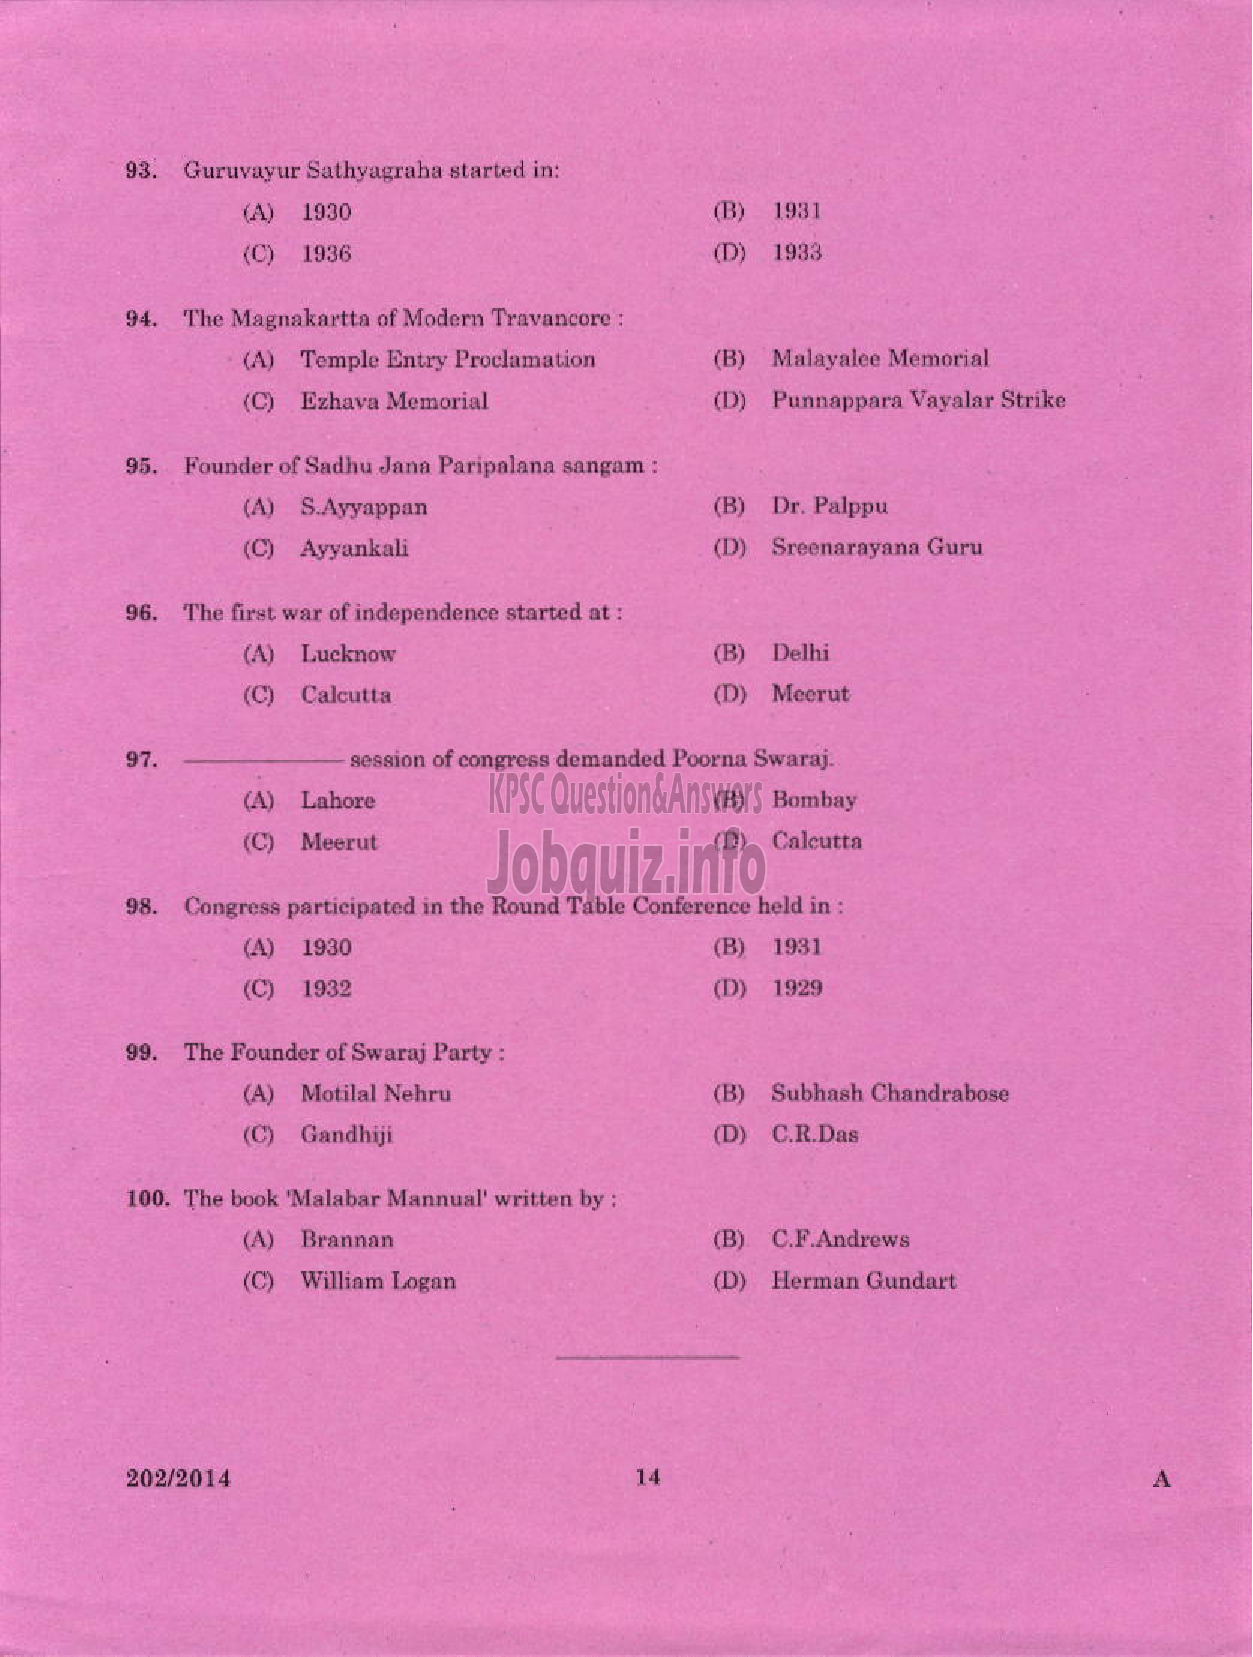 Kerala PSC Question Paper - TRADESMAN SHEET METAL ENGINEERING TECHNICAL EDUCATION TVM PTA IDK WYD AND KGD-12